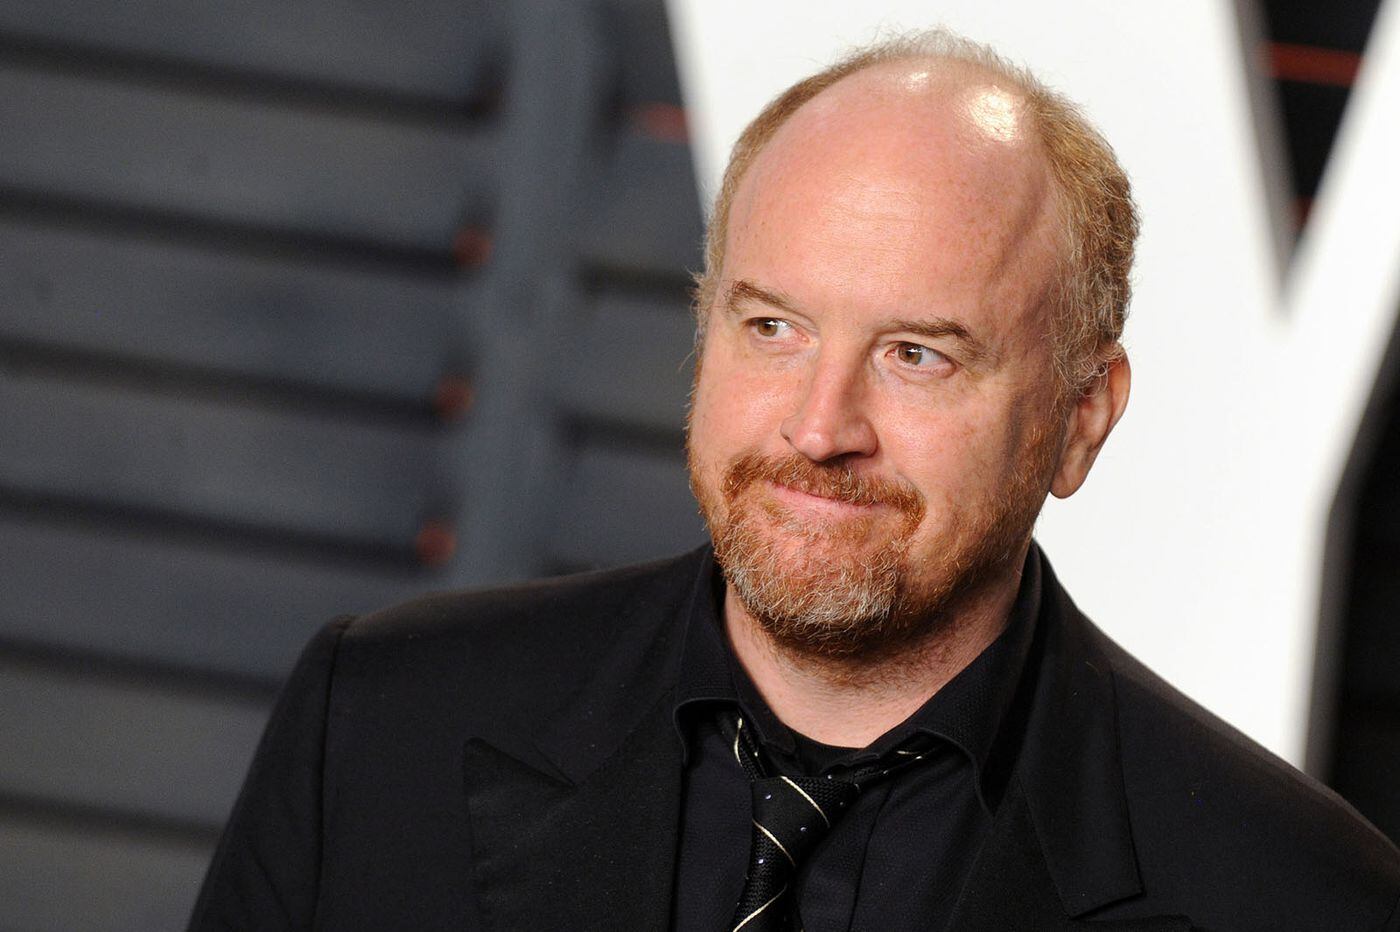 Louis C.K. books first comedy tour since admitting to sexual misconduct, including a stop in Reading